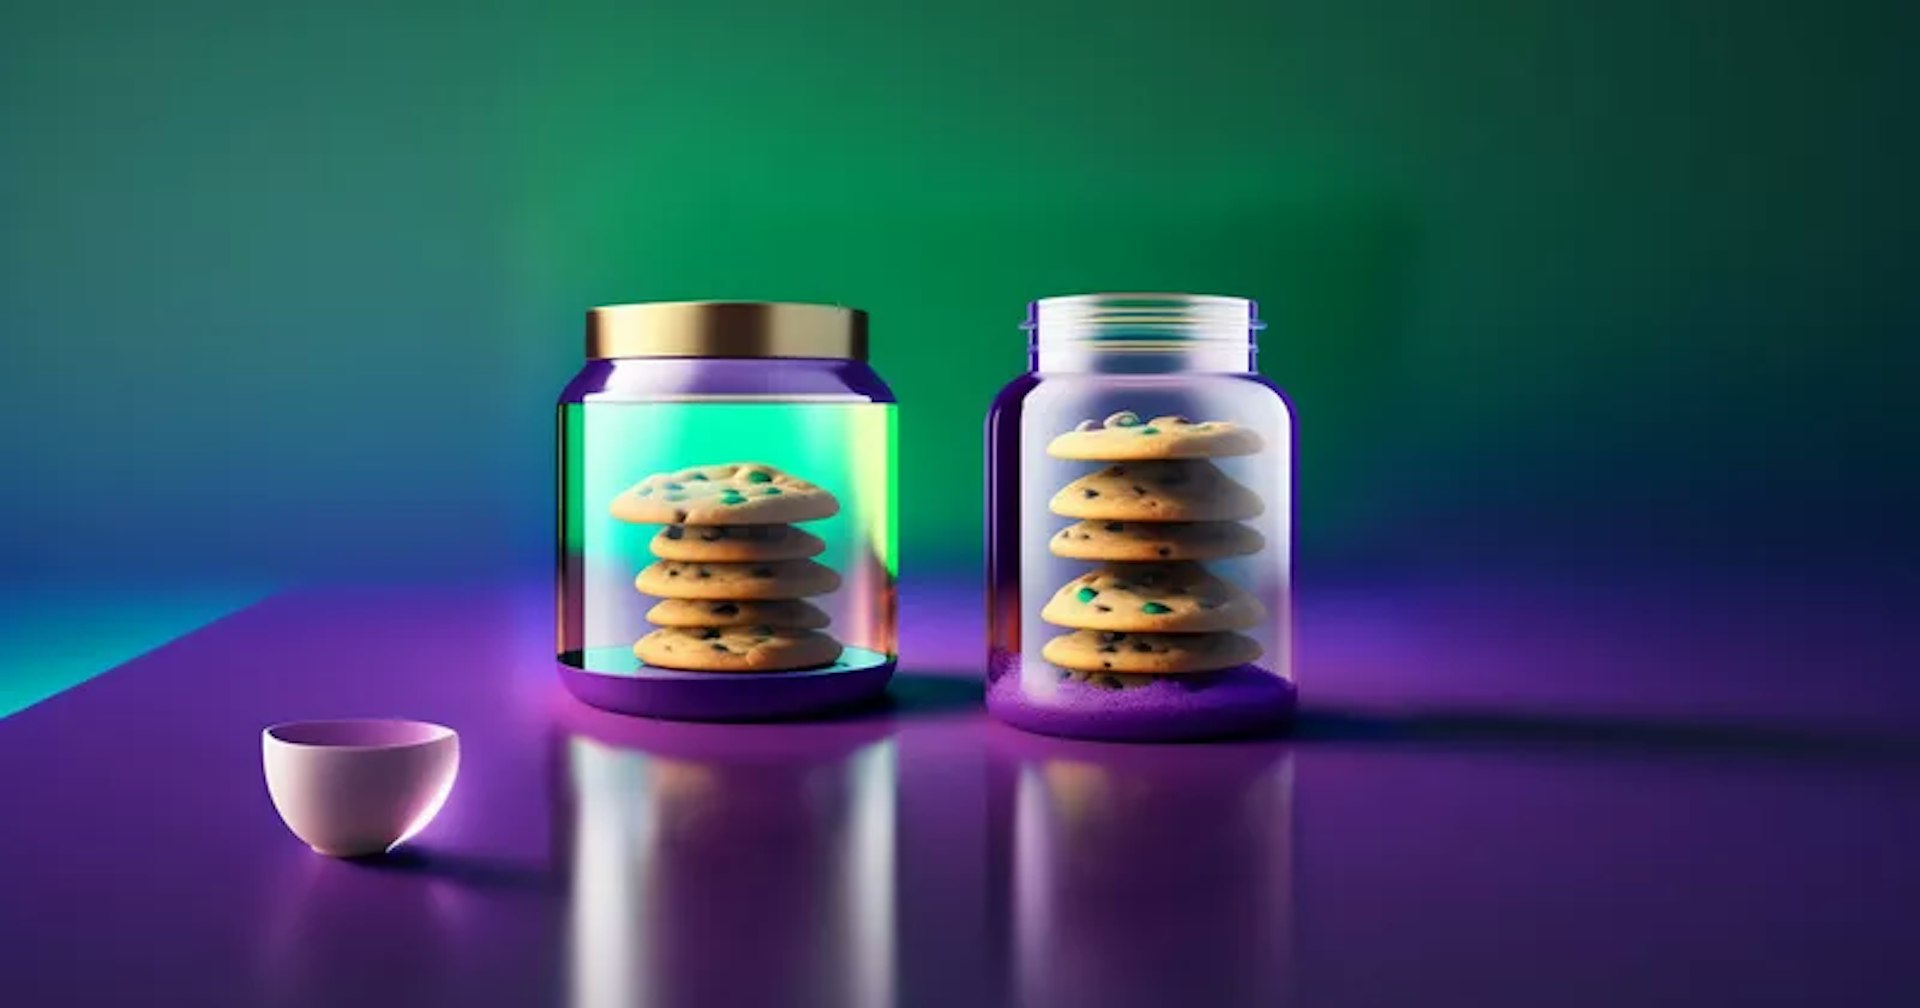  If the Third-Party Web Cookie Crumbles, Can AI Replace It?